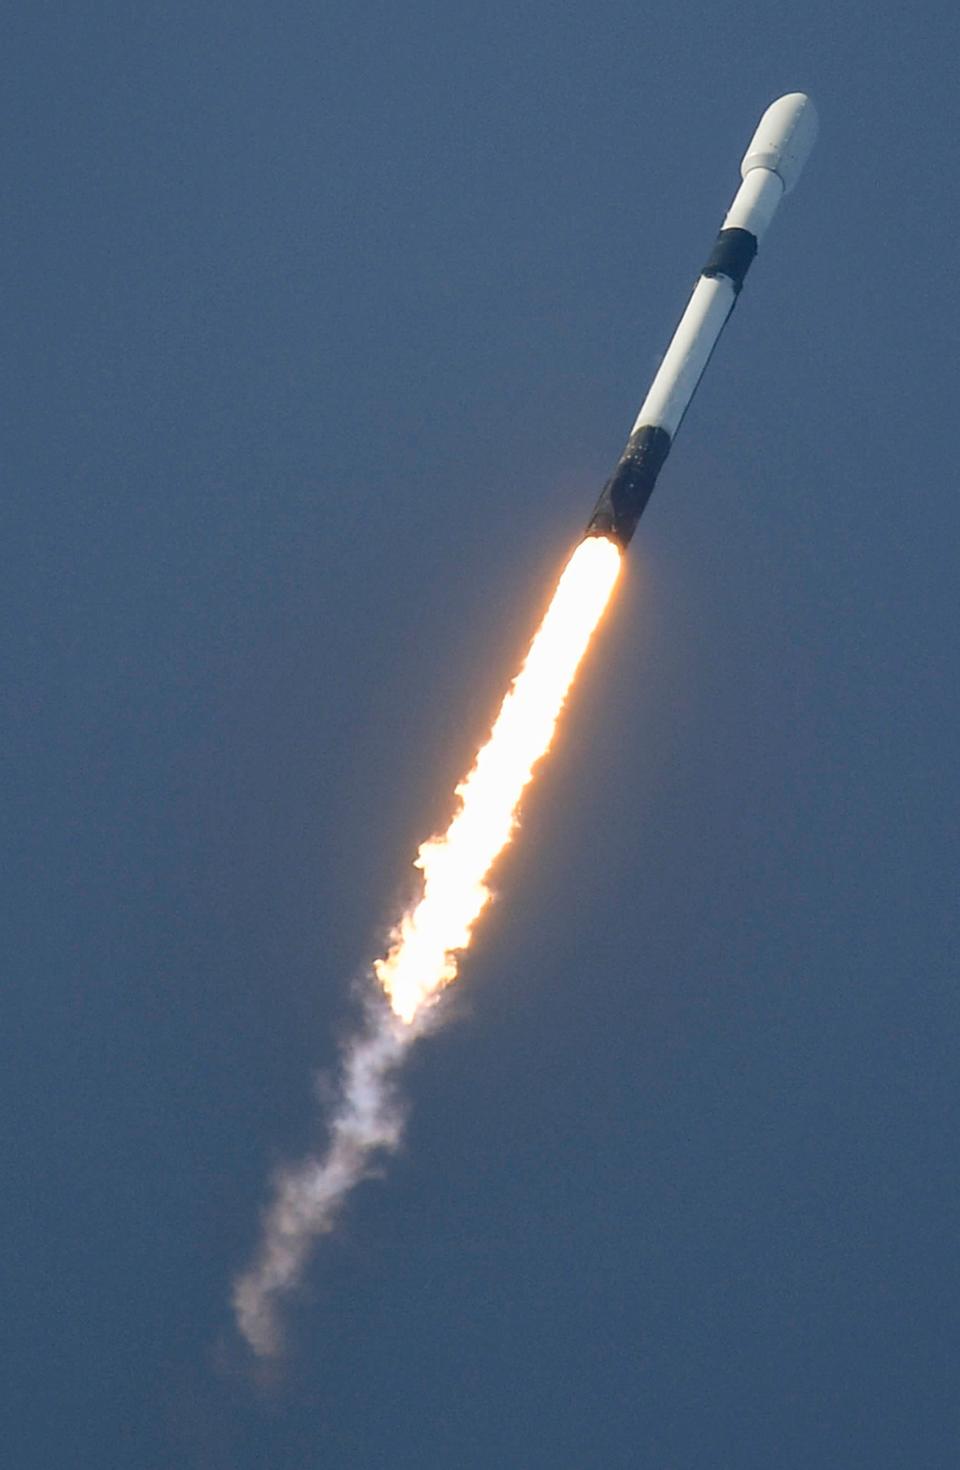 A SpaceX Falcon 9 rocket lifts off from Cape Canaveral Space Force Station, FL Wednesday, June 8, 2022. The rocket is carrying a Egyptian communications satellite.  Mandatory Credit: Craig Bailey/FLORIDA TODAY via USA TODAY NETWORK